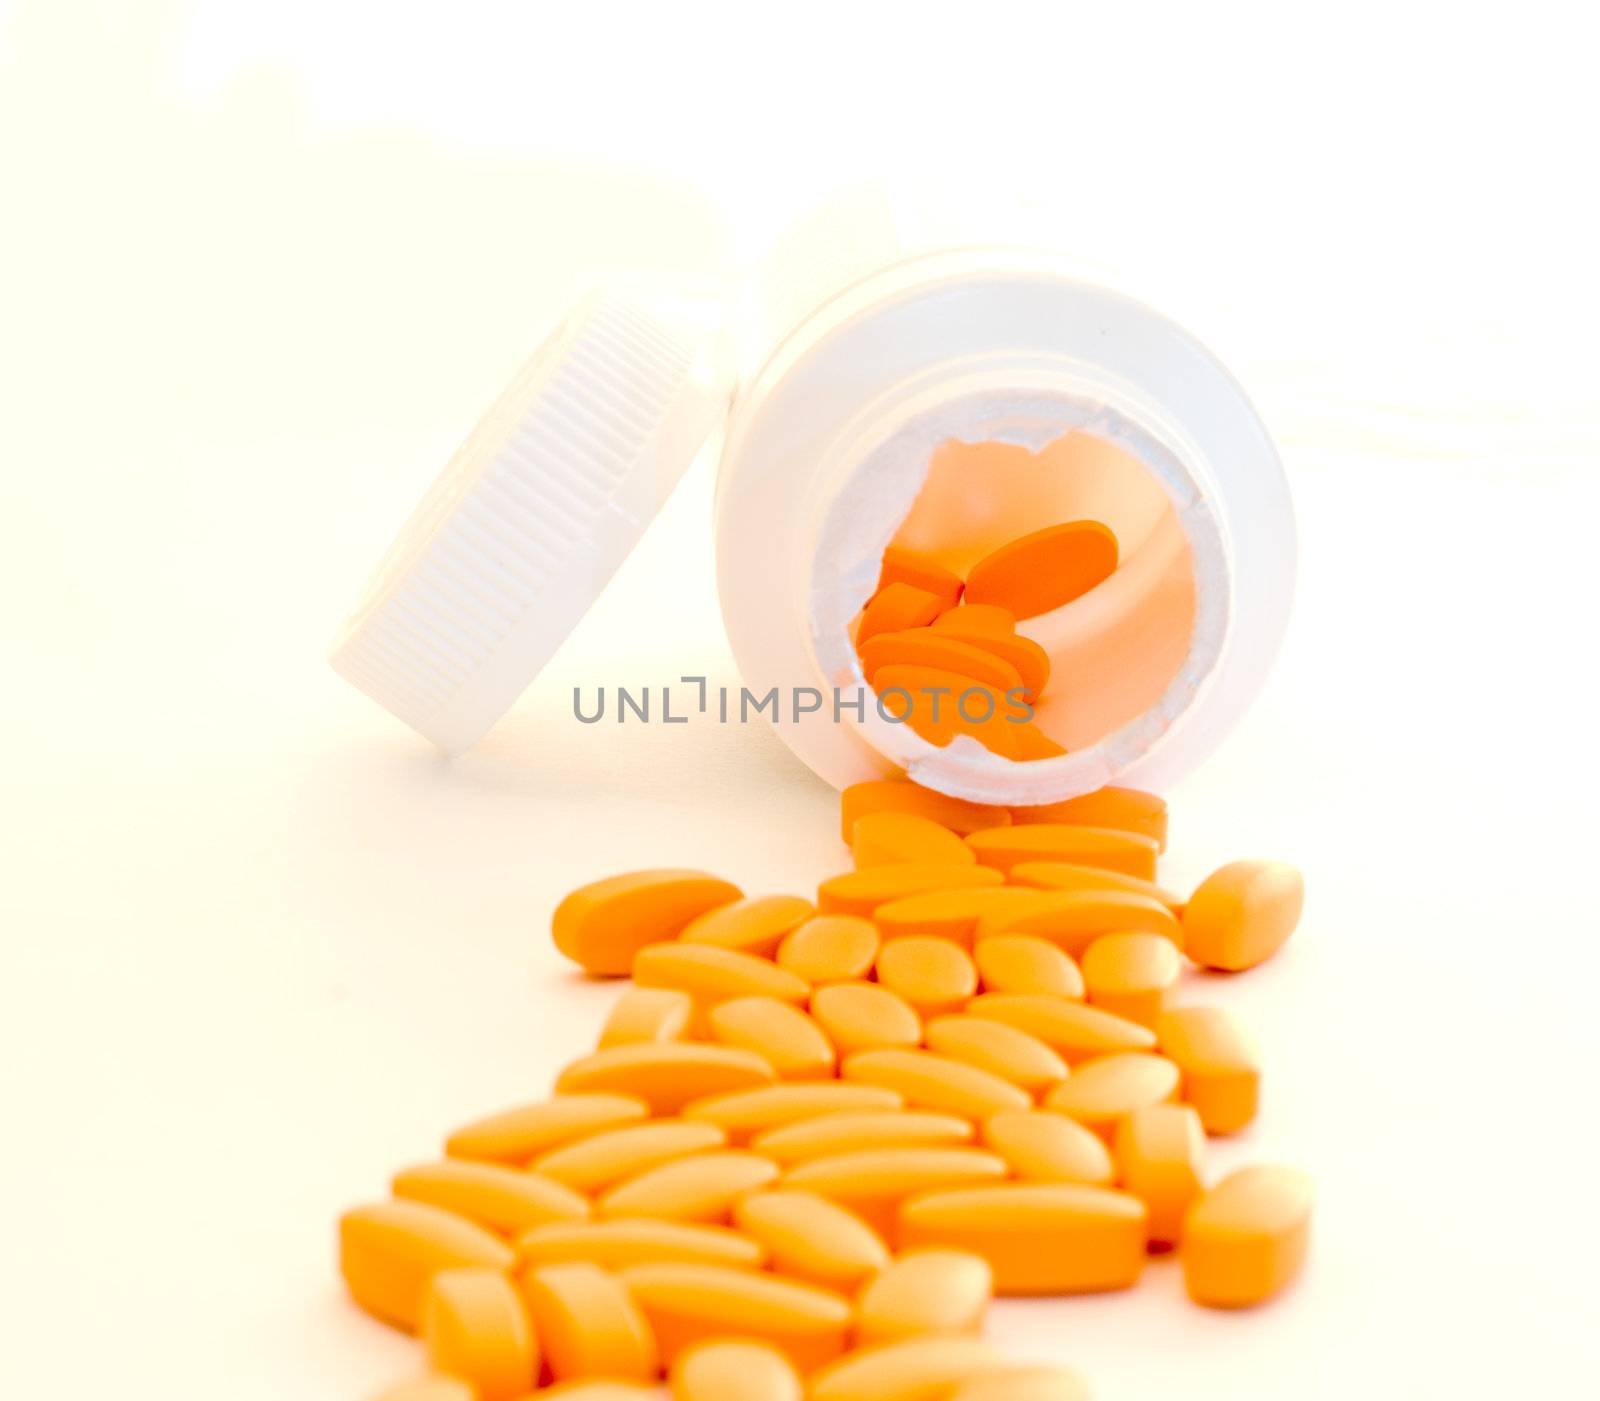 Healthy vitamins pouring out of a container, isolated on a white background